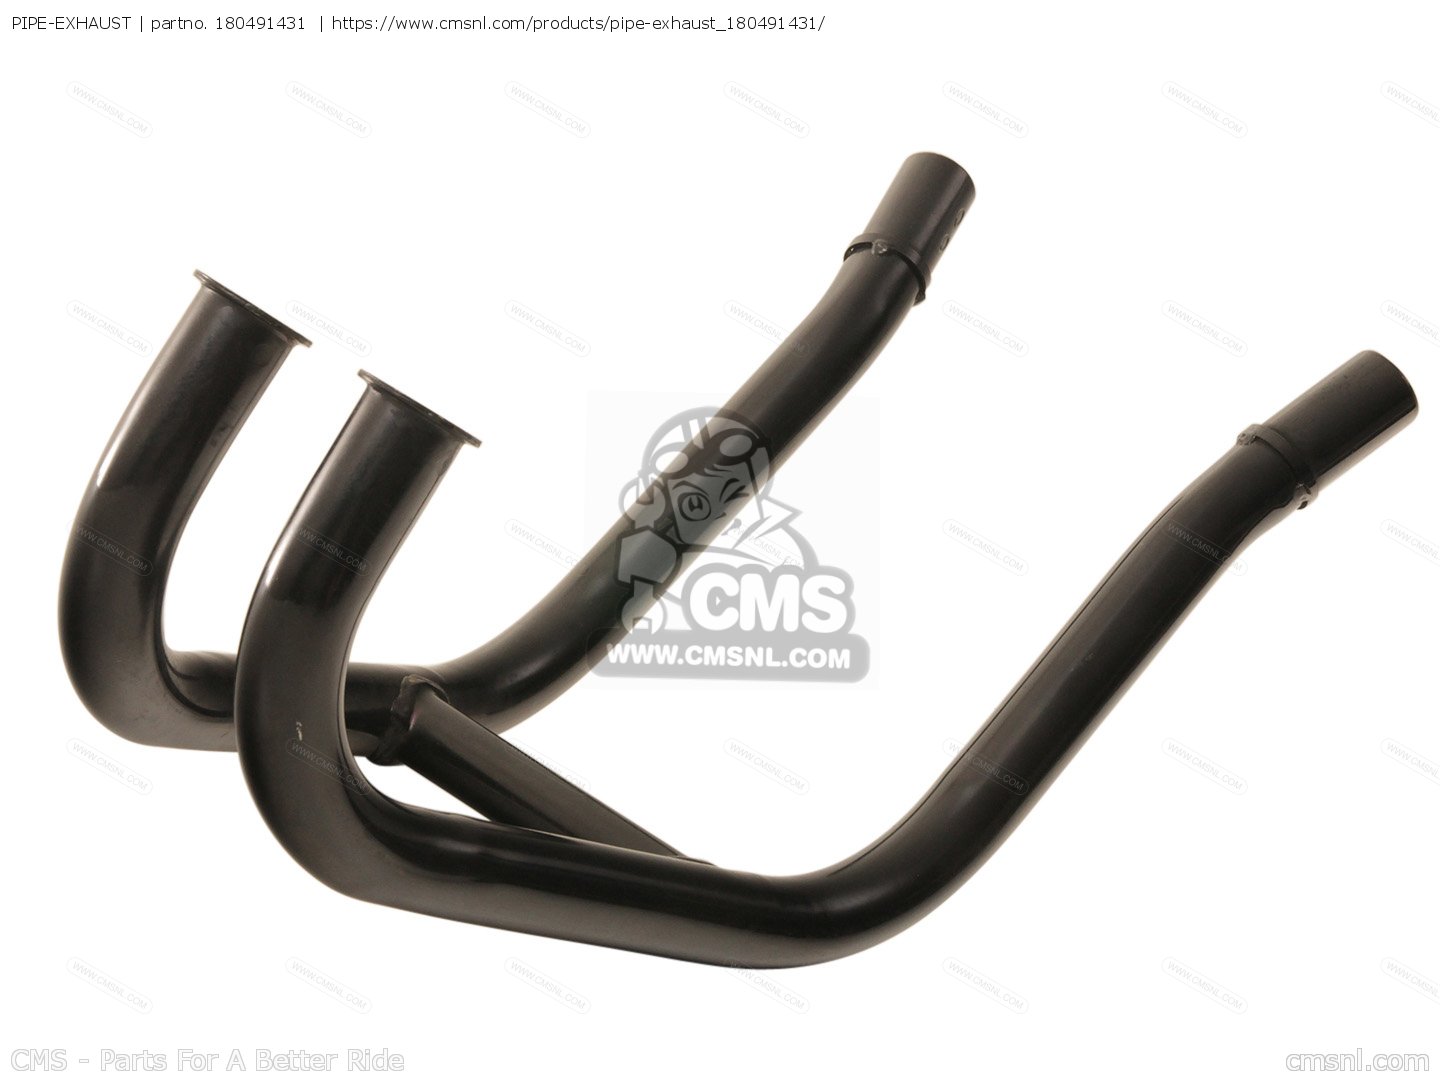 PIPE-EXHAUST for EX250H2 ZZR250 1991 EUROPE UK AR GR NR - order at 